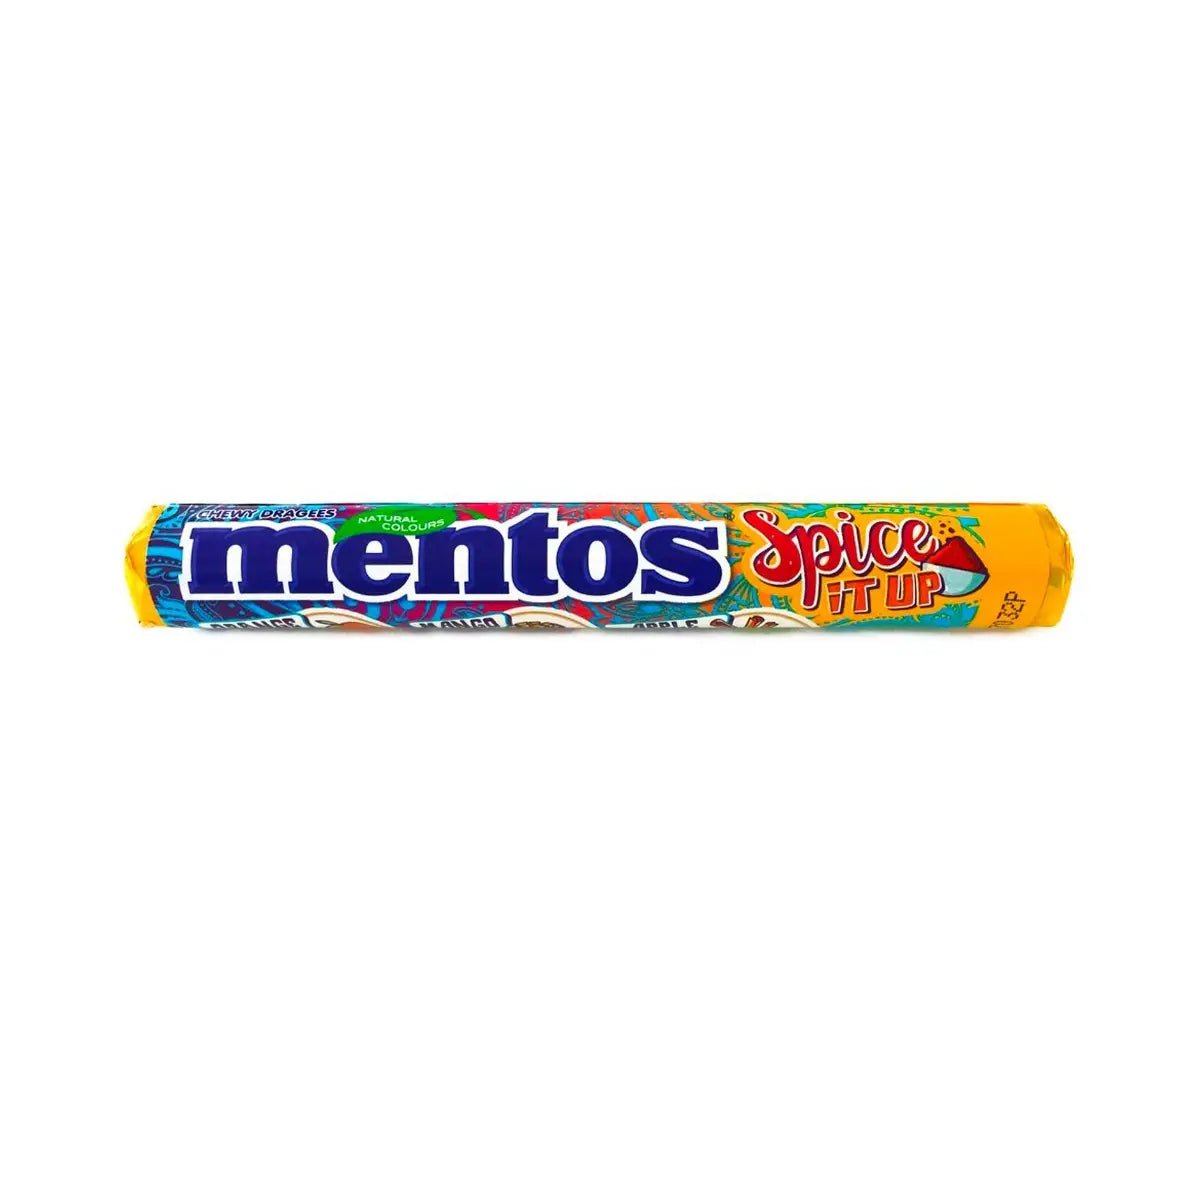 Mentos Chewy Spice 29g - Candy Mail UK